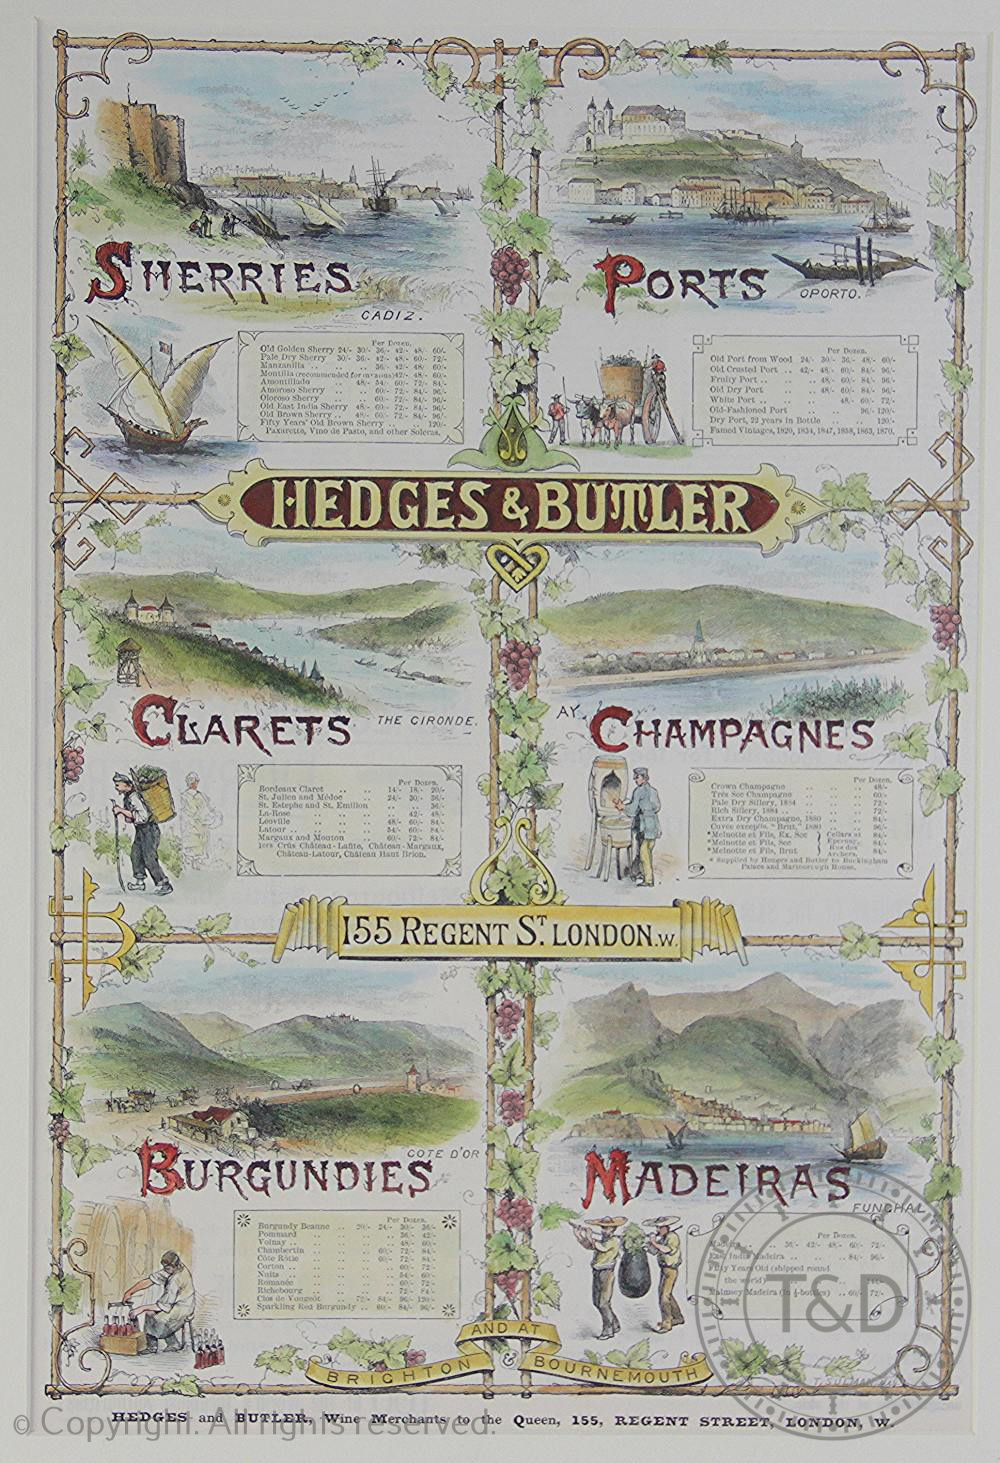 A Hedges and Butler wine advertising print, listing Sherries, Ports, Clarets, Champagnes,